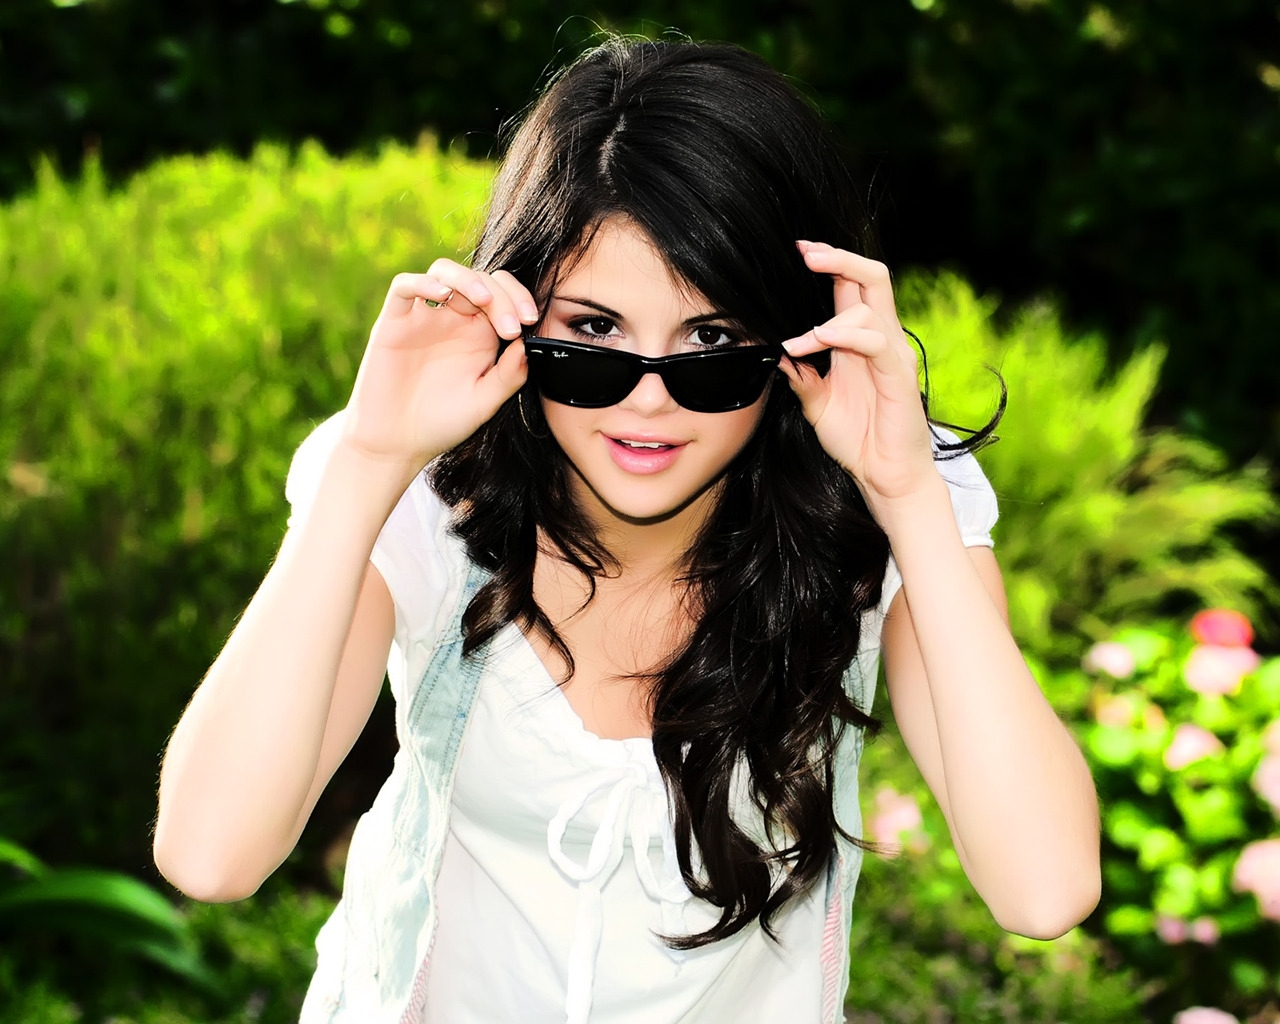 Cool Selena Gomez for 1280 x 1024 resolution